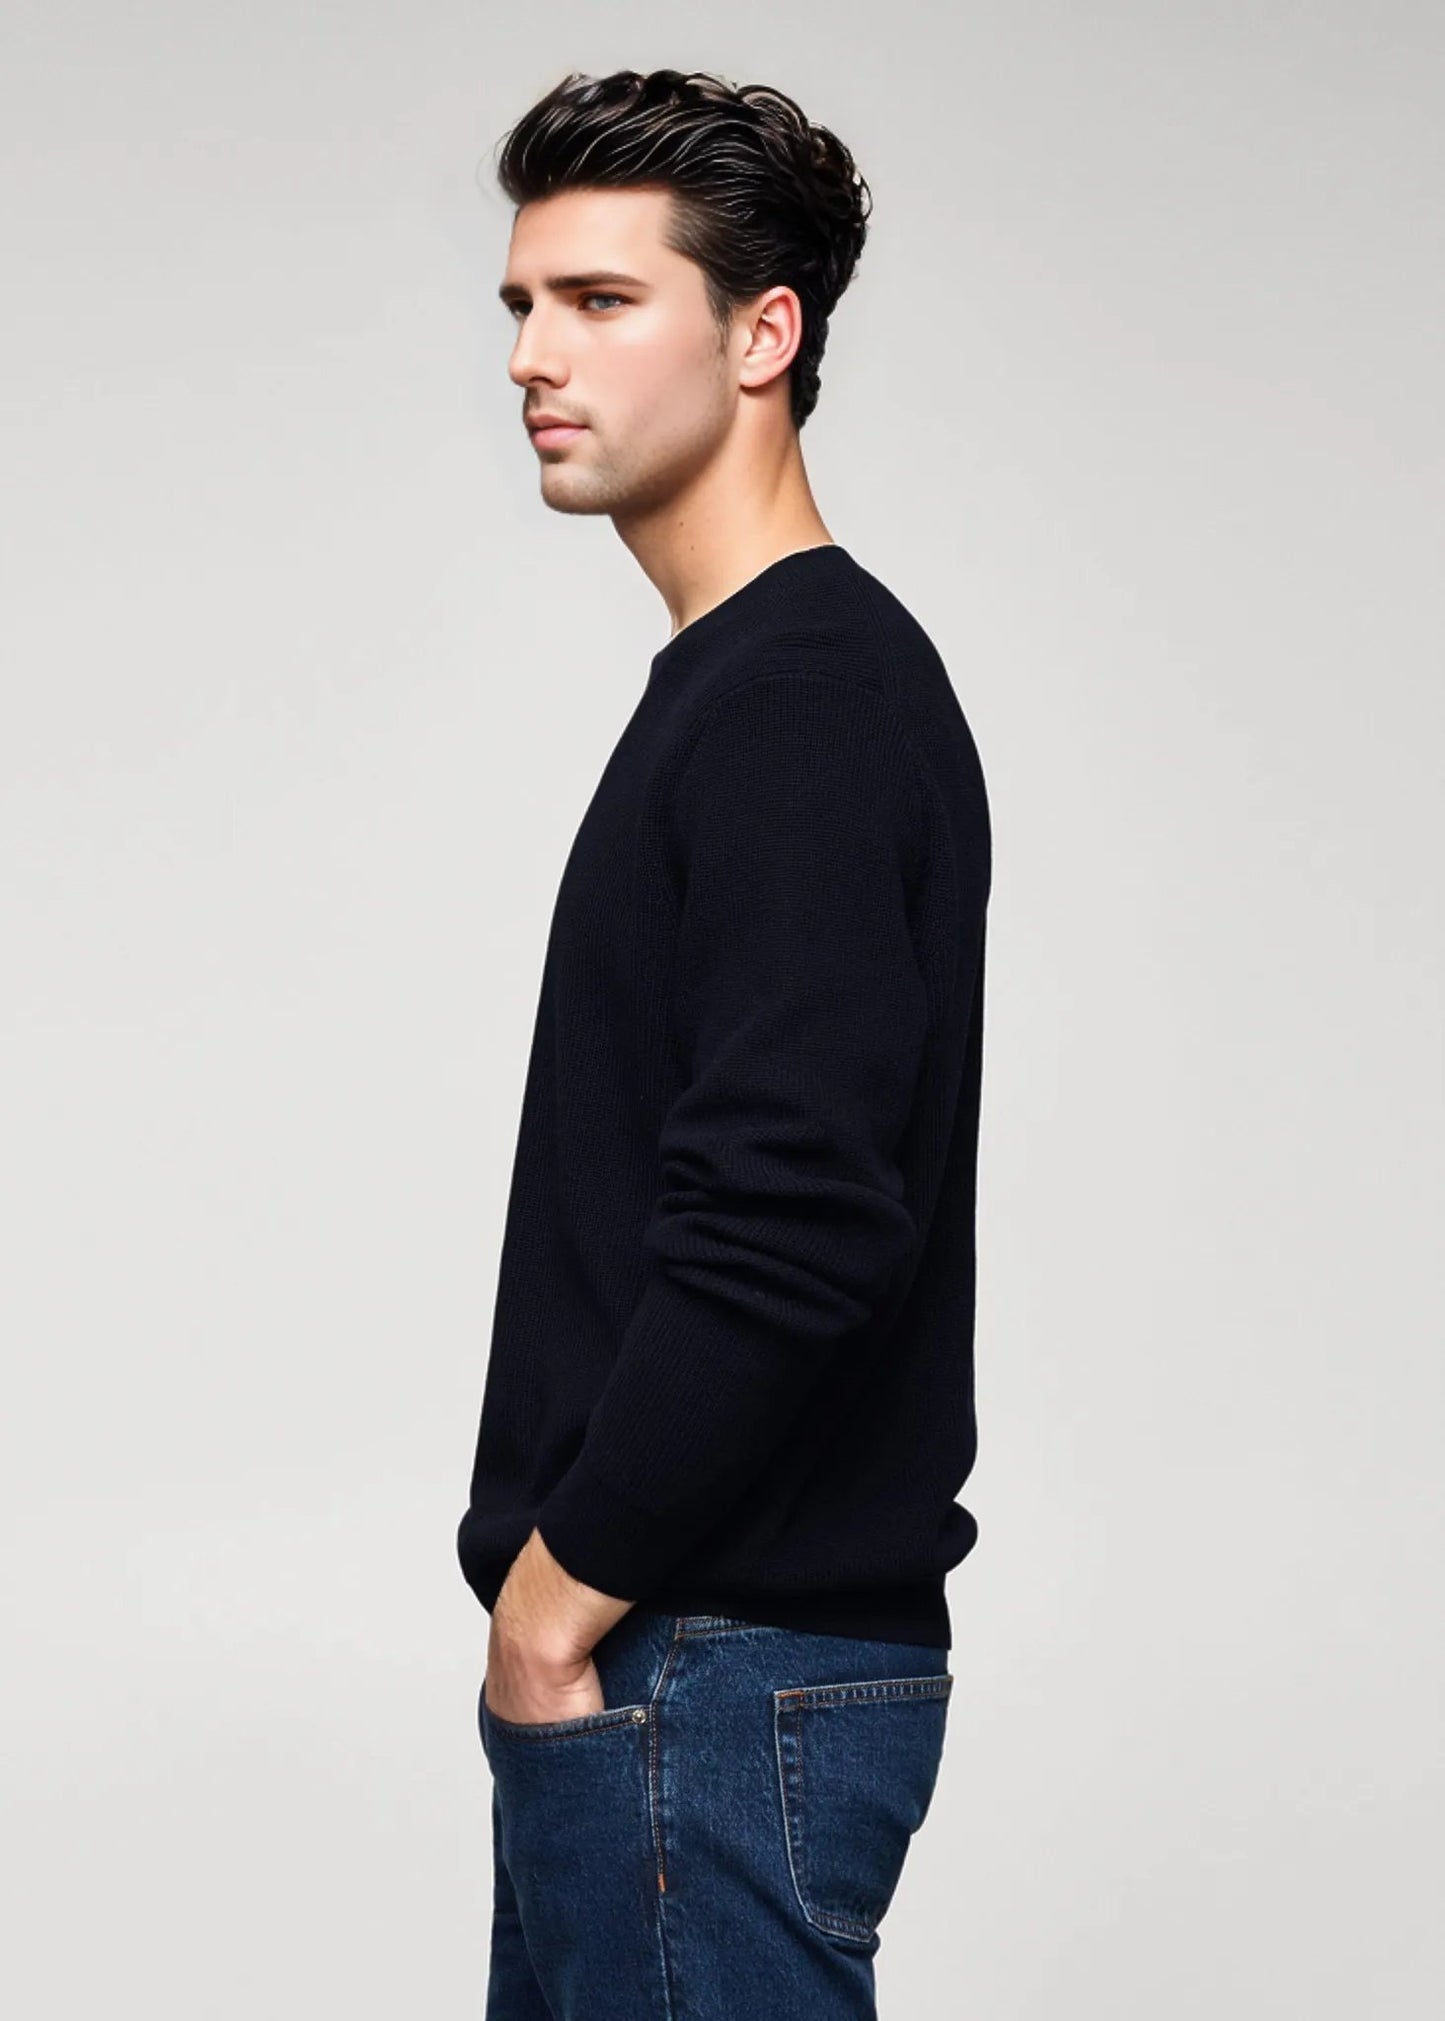 Hemsters Blue Knitted Sweatshirt For Mens